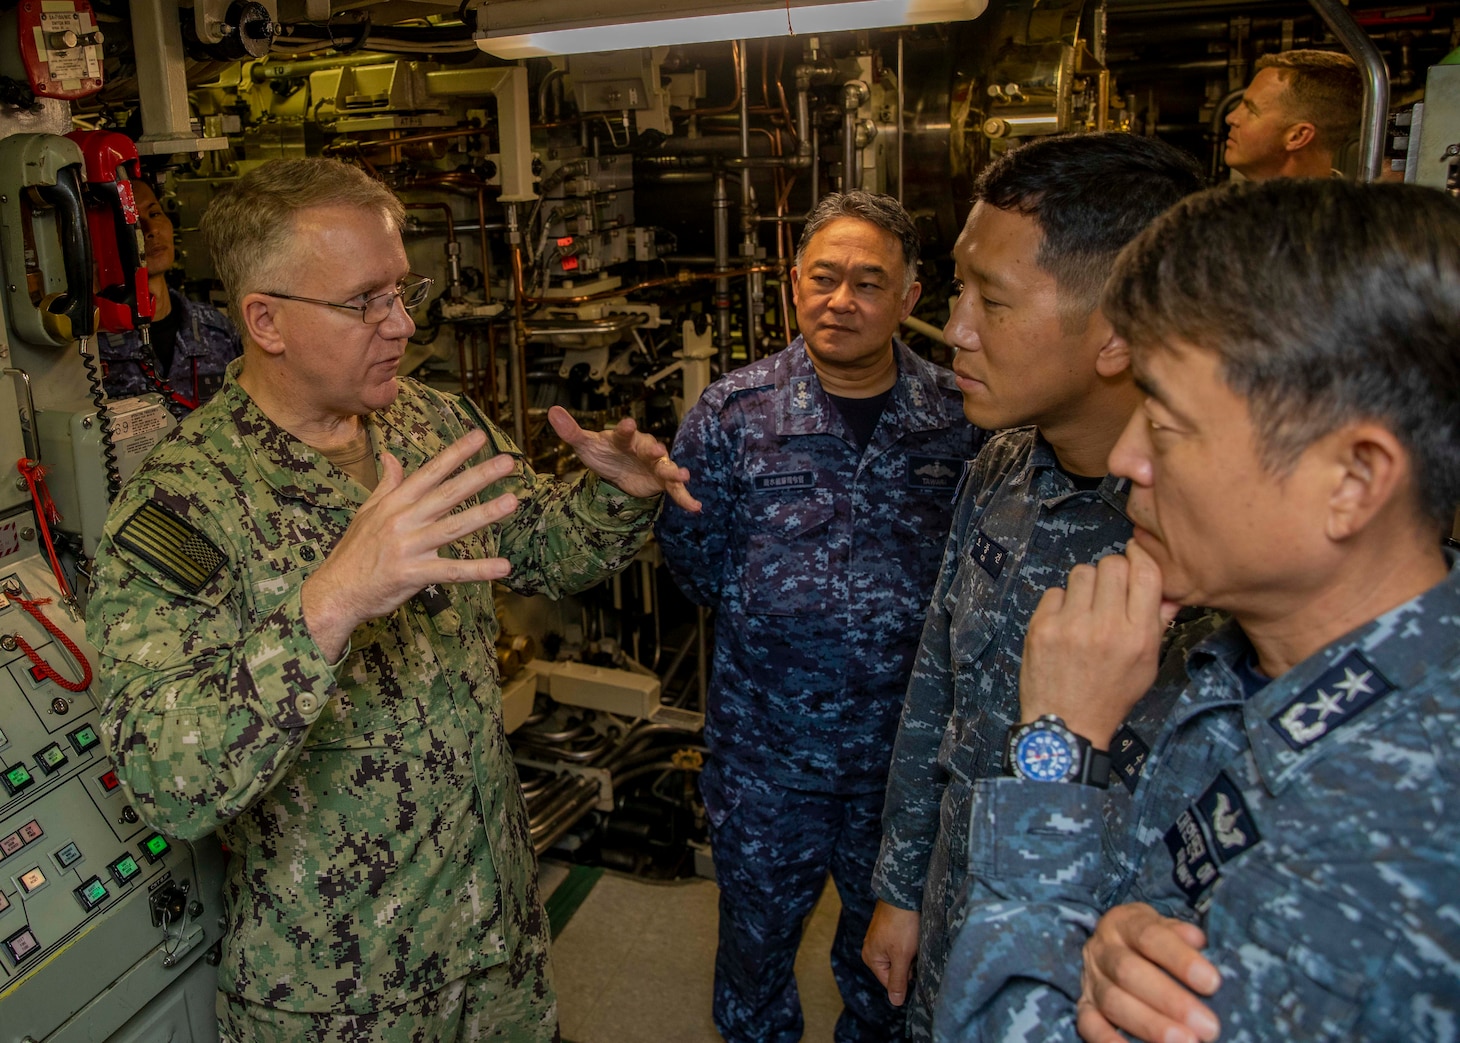 U.S. Navy Rear Adm. Rick Seif, commander, Submarine Group 7, left, speaks with Japan Maritime Self-Defense Force Vice Adm. Tateki Tawara, commander, Fleet Submarine Force, second from left; Republic of Korea (ROK) Navy Rear Adm. Su Youl Lee, commander, Submarine Force, far right; and ROK Navy Lt. Cmdr. Dongkeon Oh, executive officer of ROK Navy submarine ROKS SON WON IL (SS-072); aboard the Ohio-class ballistic-missile submarine USS Maine (SSBN 741) during an underway embark in vicinity of Guam, April 18. During their time at sea aboard the submarine, the senior leaders were provided tours and demonstrations of the unit’s capabilities, which operates globally under U.S. Strategic Command.